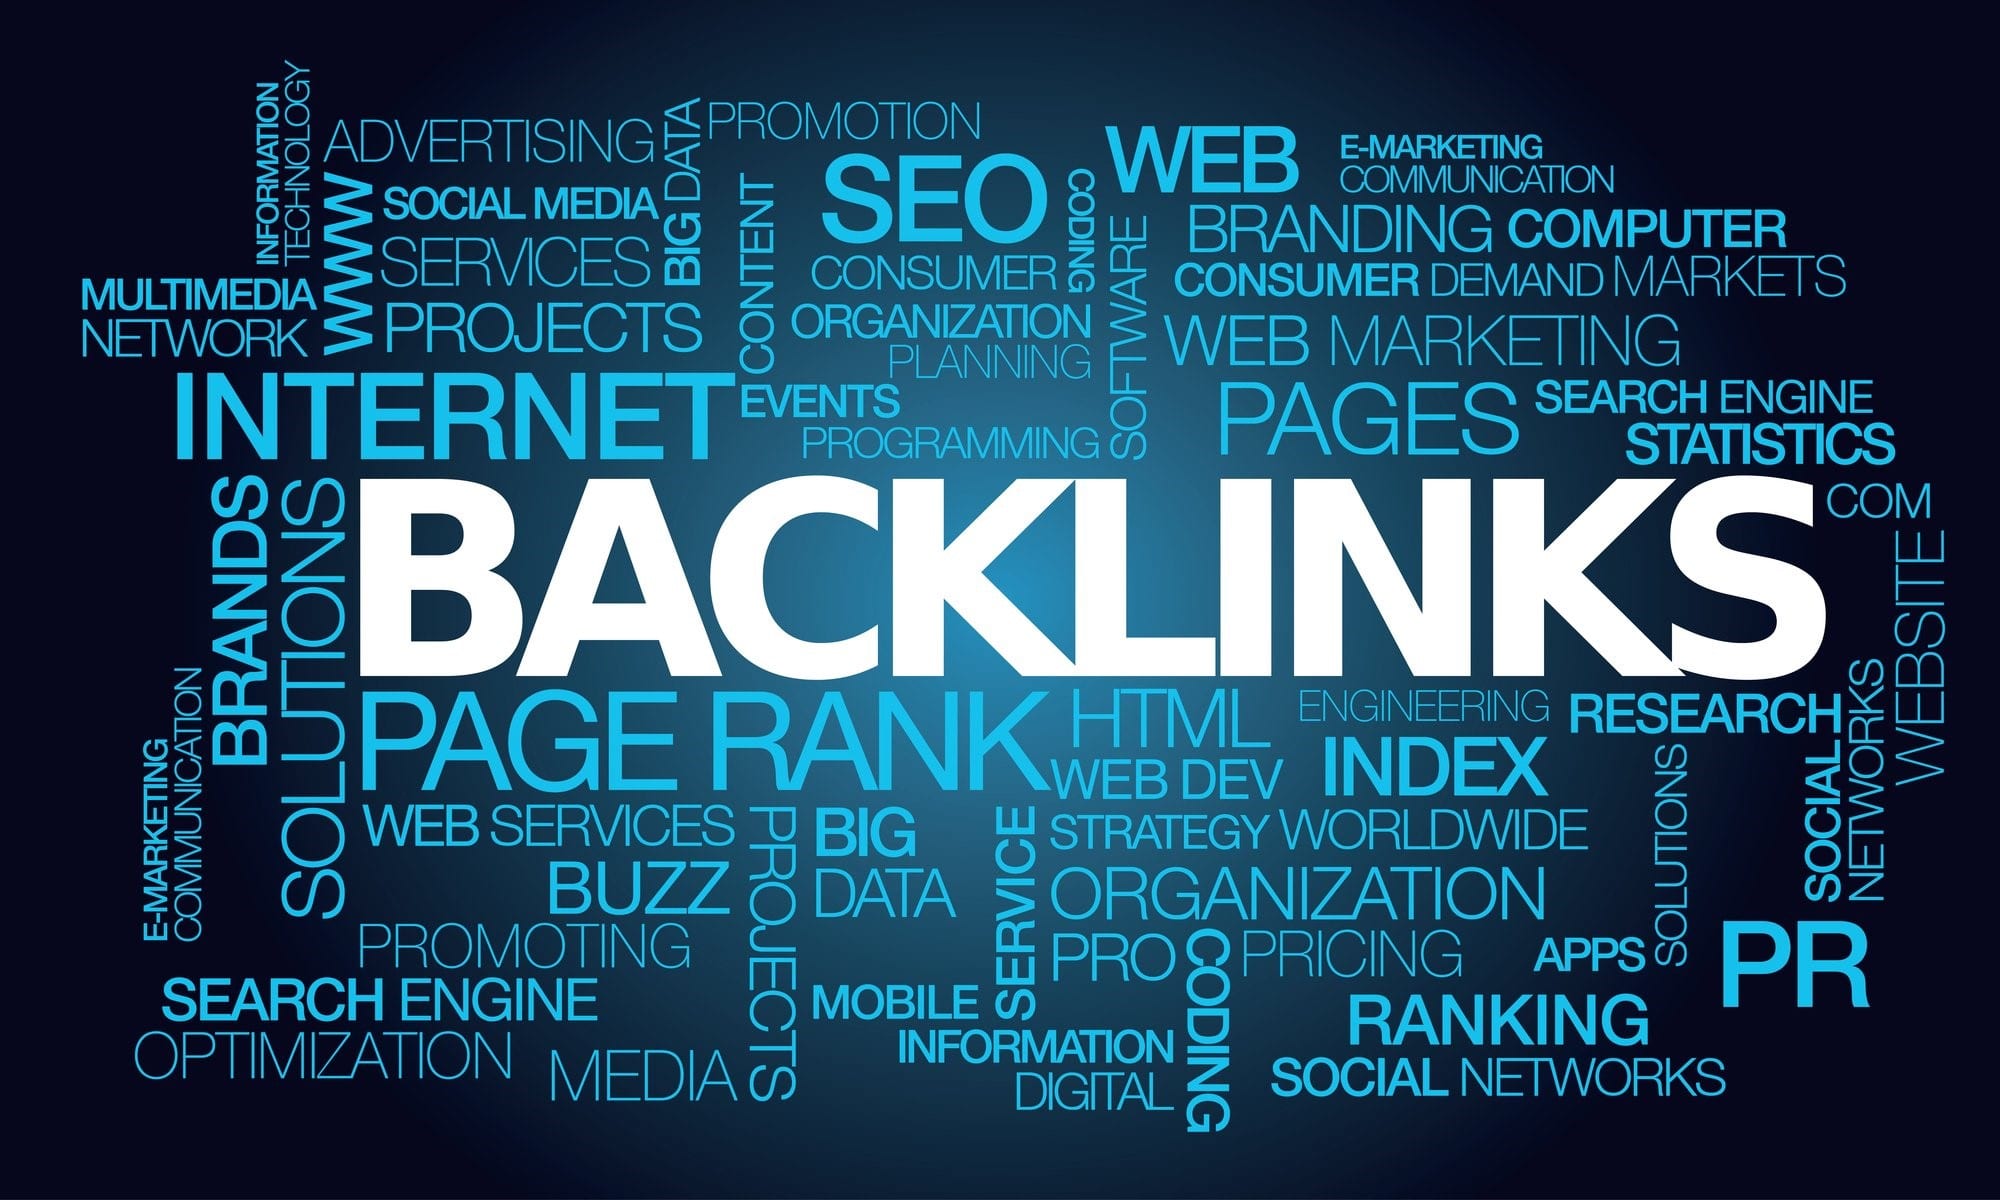 High Domain Authority Sites for Backlinks